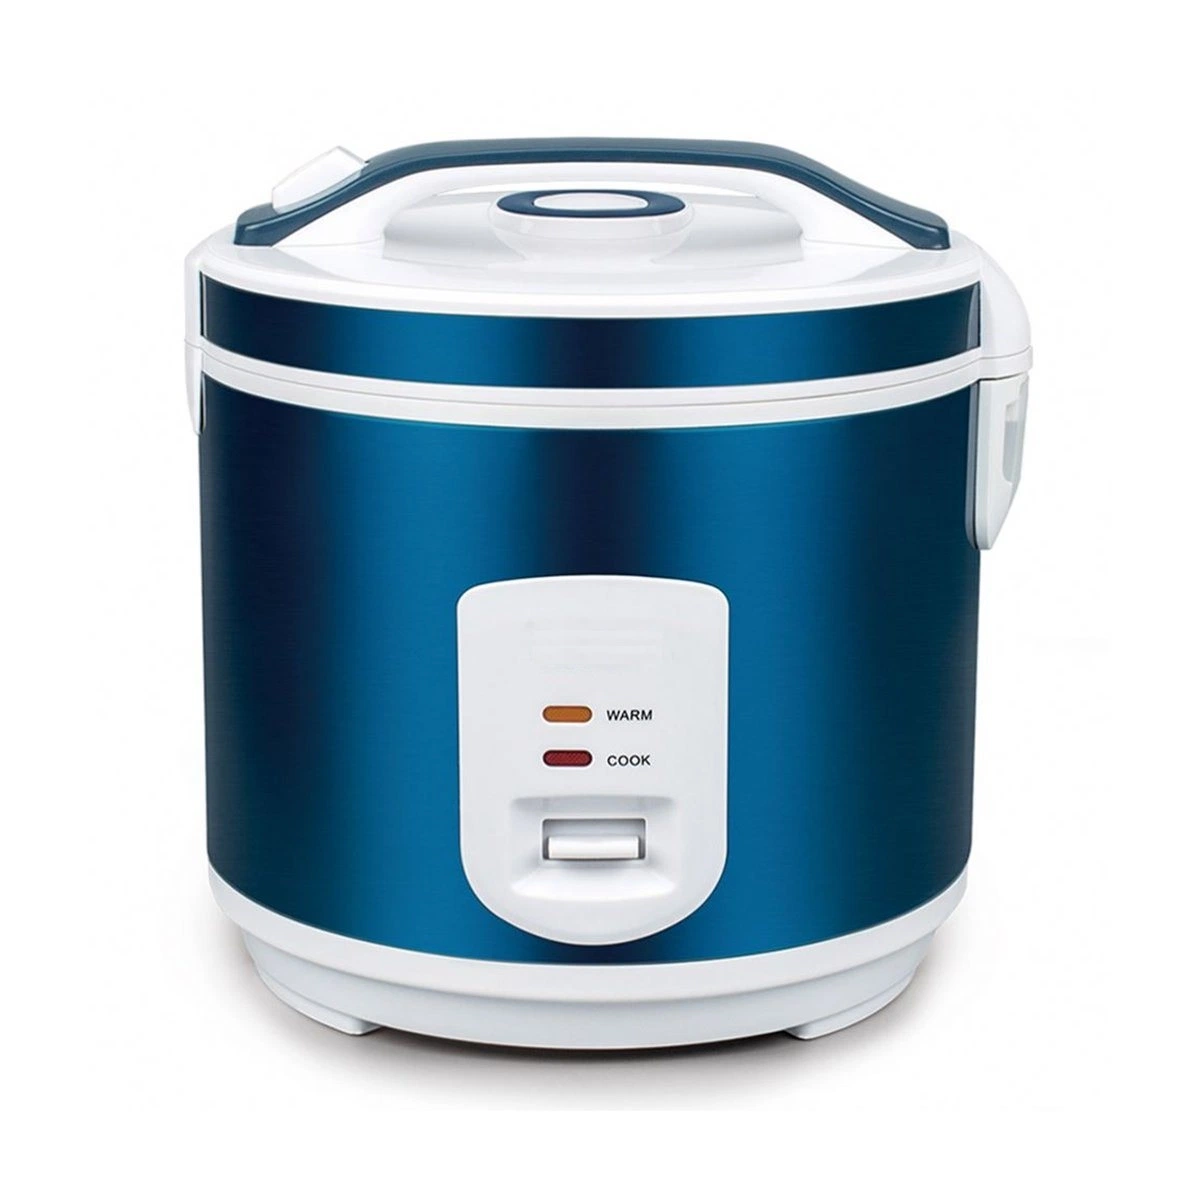 Hot Sales Cooking Appliances Kitchen Deluxe Good Price Multi Function National Electric Rice Cooker 1.0L-3.2L